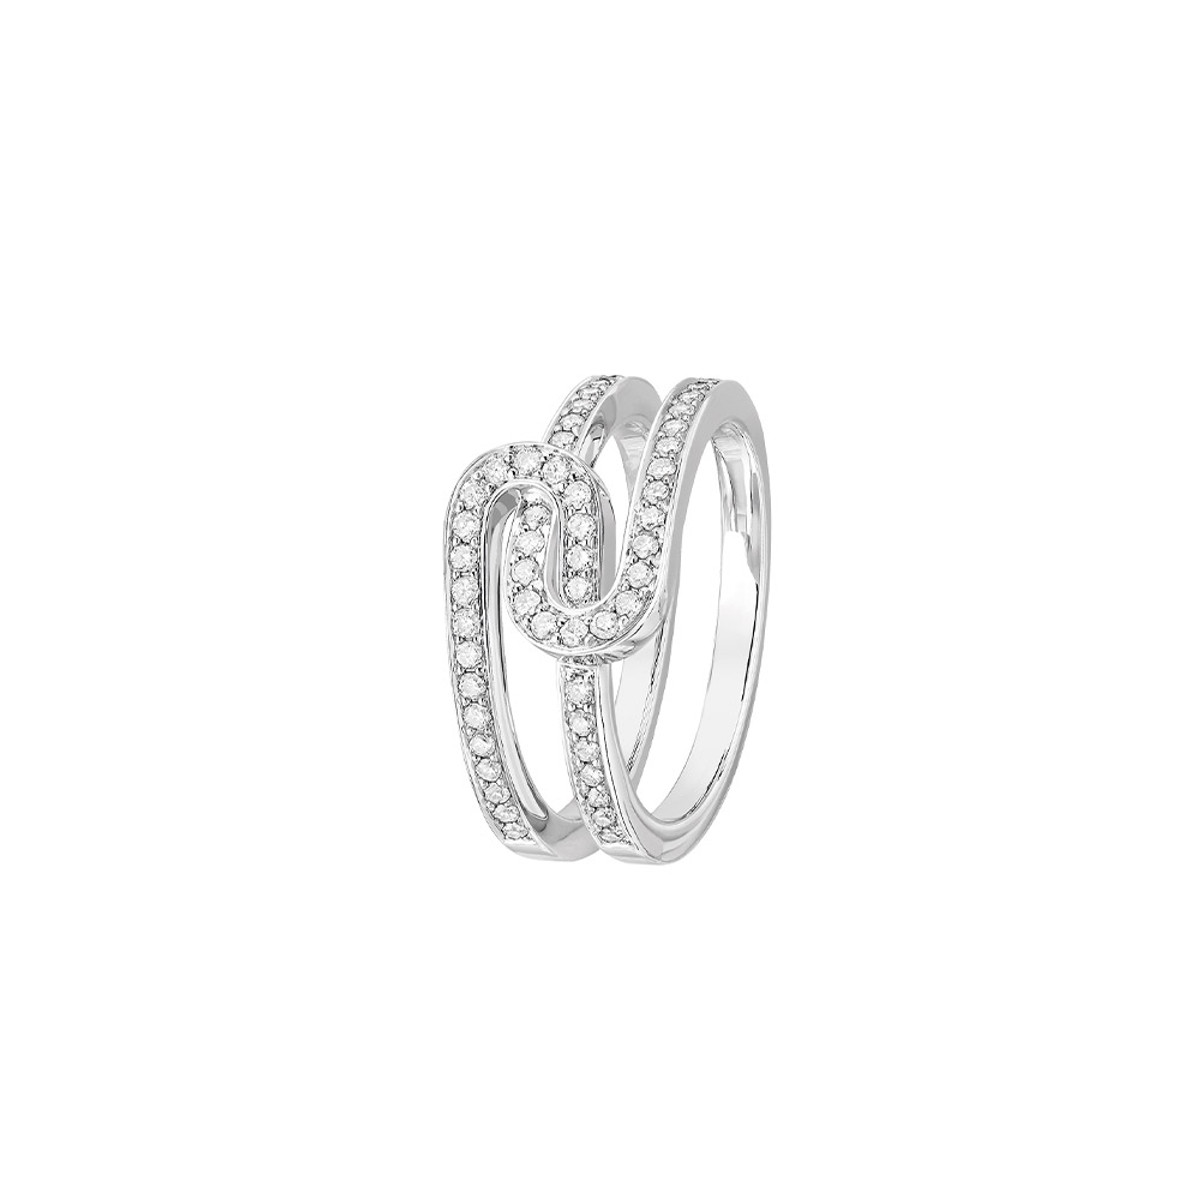 Dinh Van 18K White Gold Maillon Star Ring-60462 Product Image